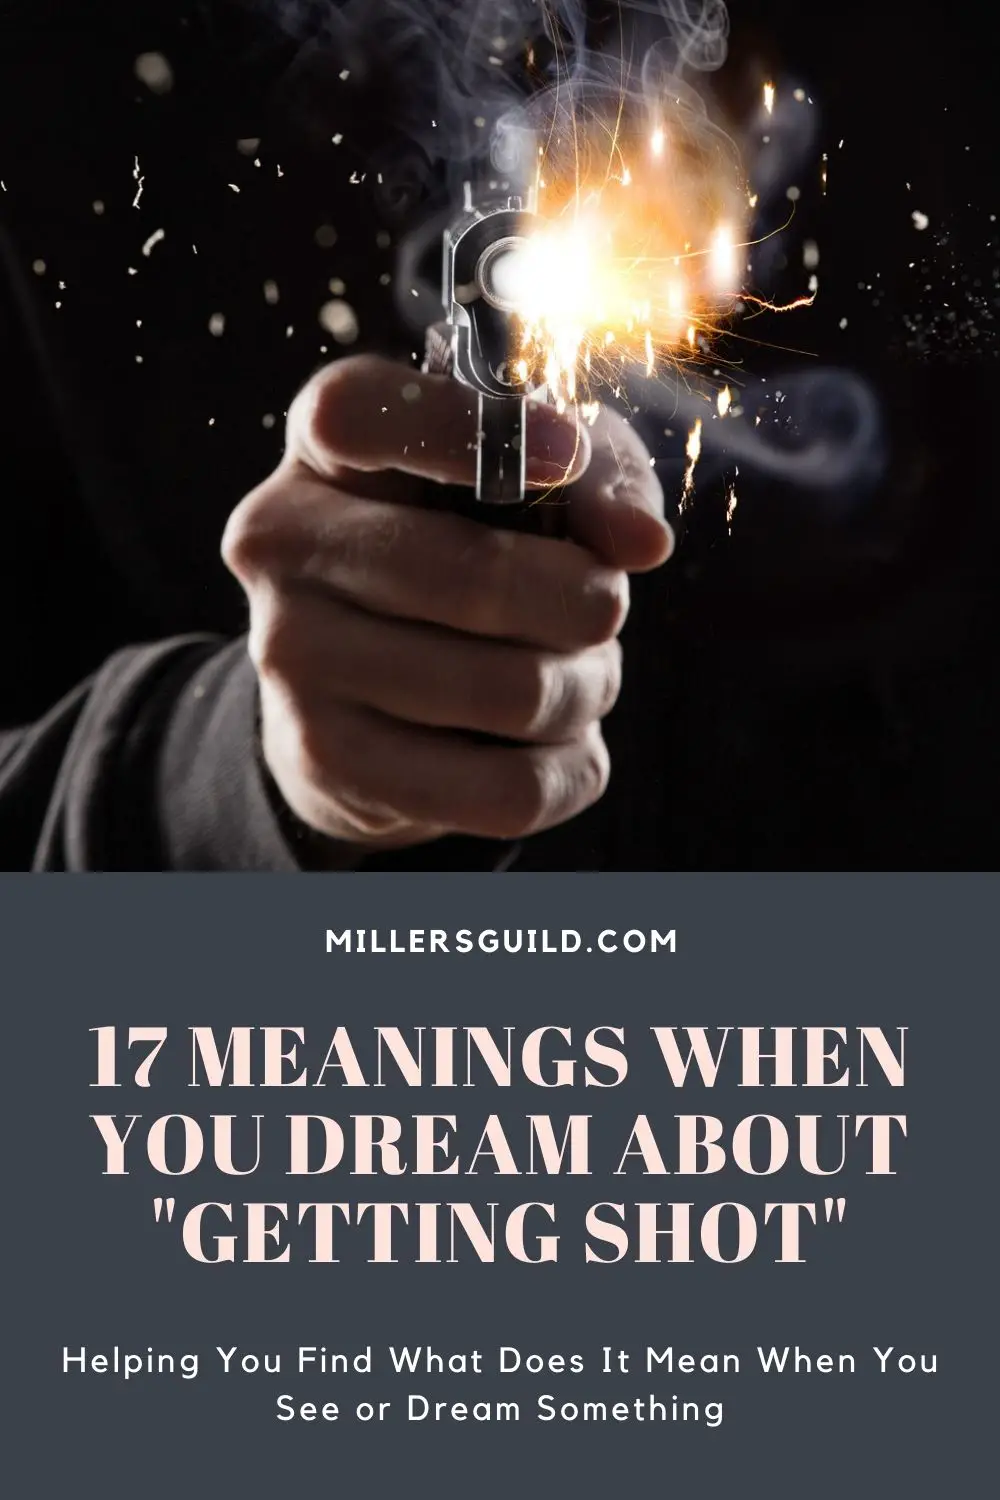 How To Deal With Shooting Dreams